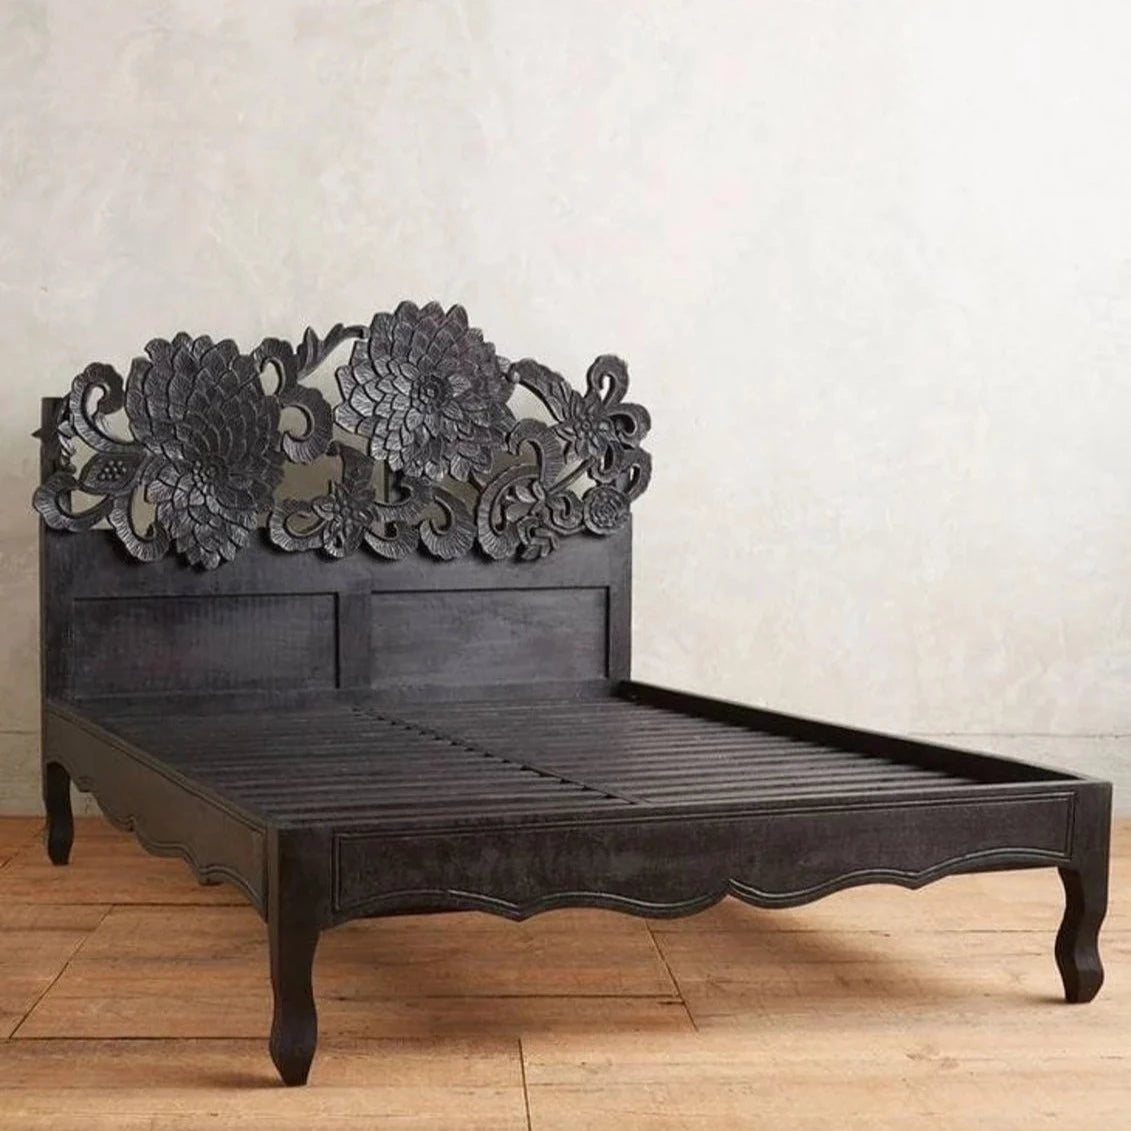 Handcarved Wood Bed frame-anchoring Piece Carving Traditional Styles Tropical Hardwood